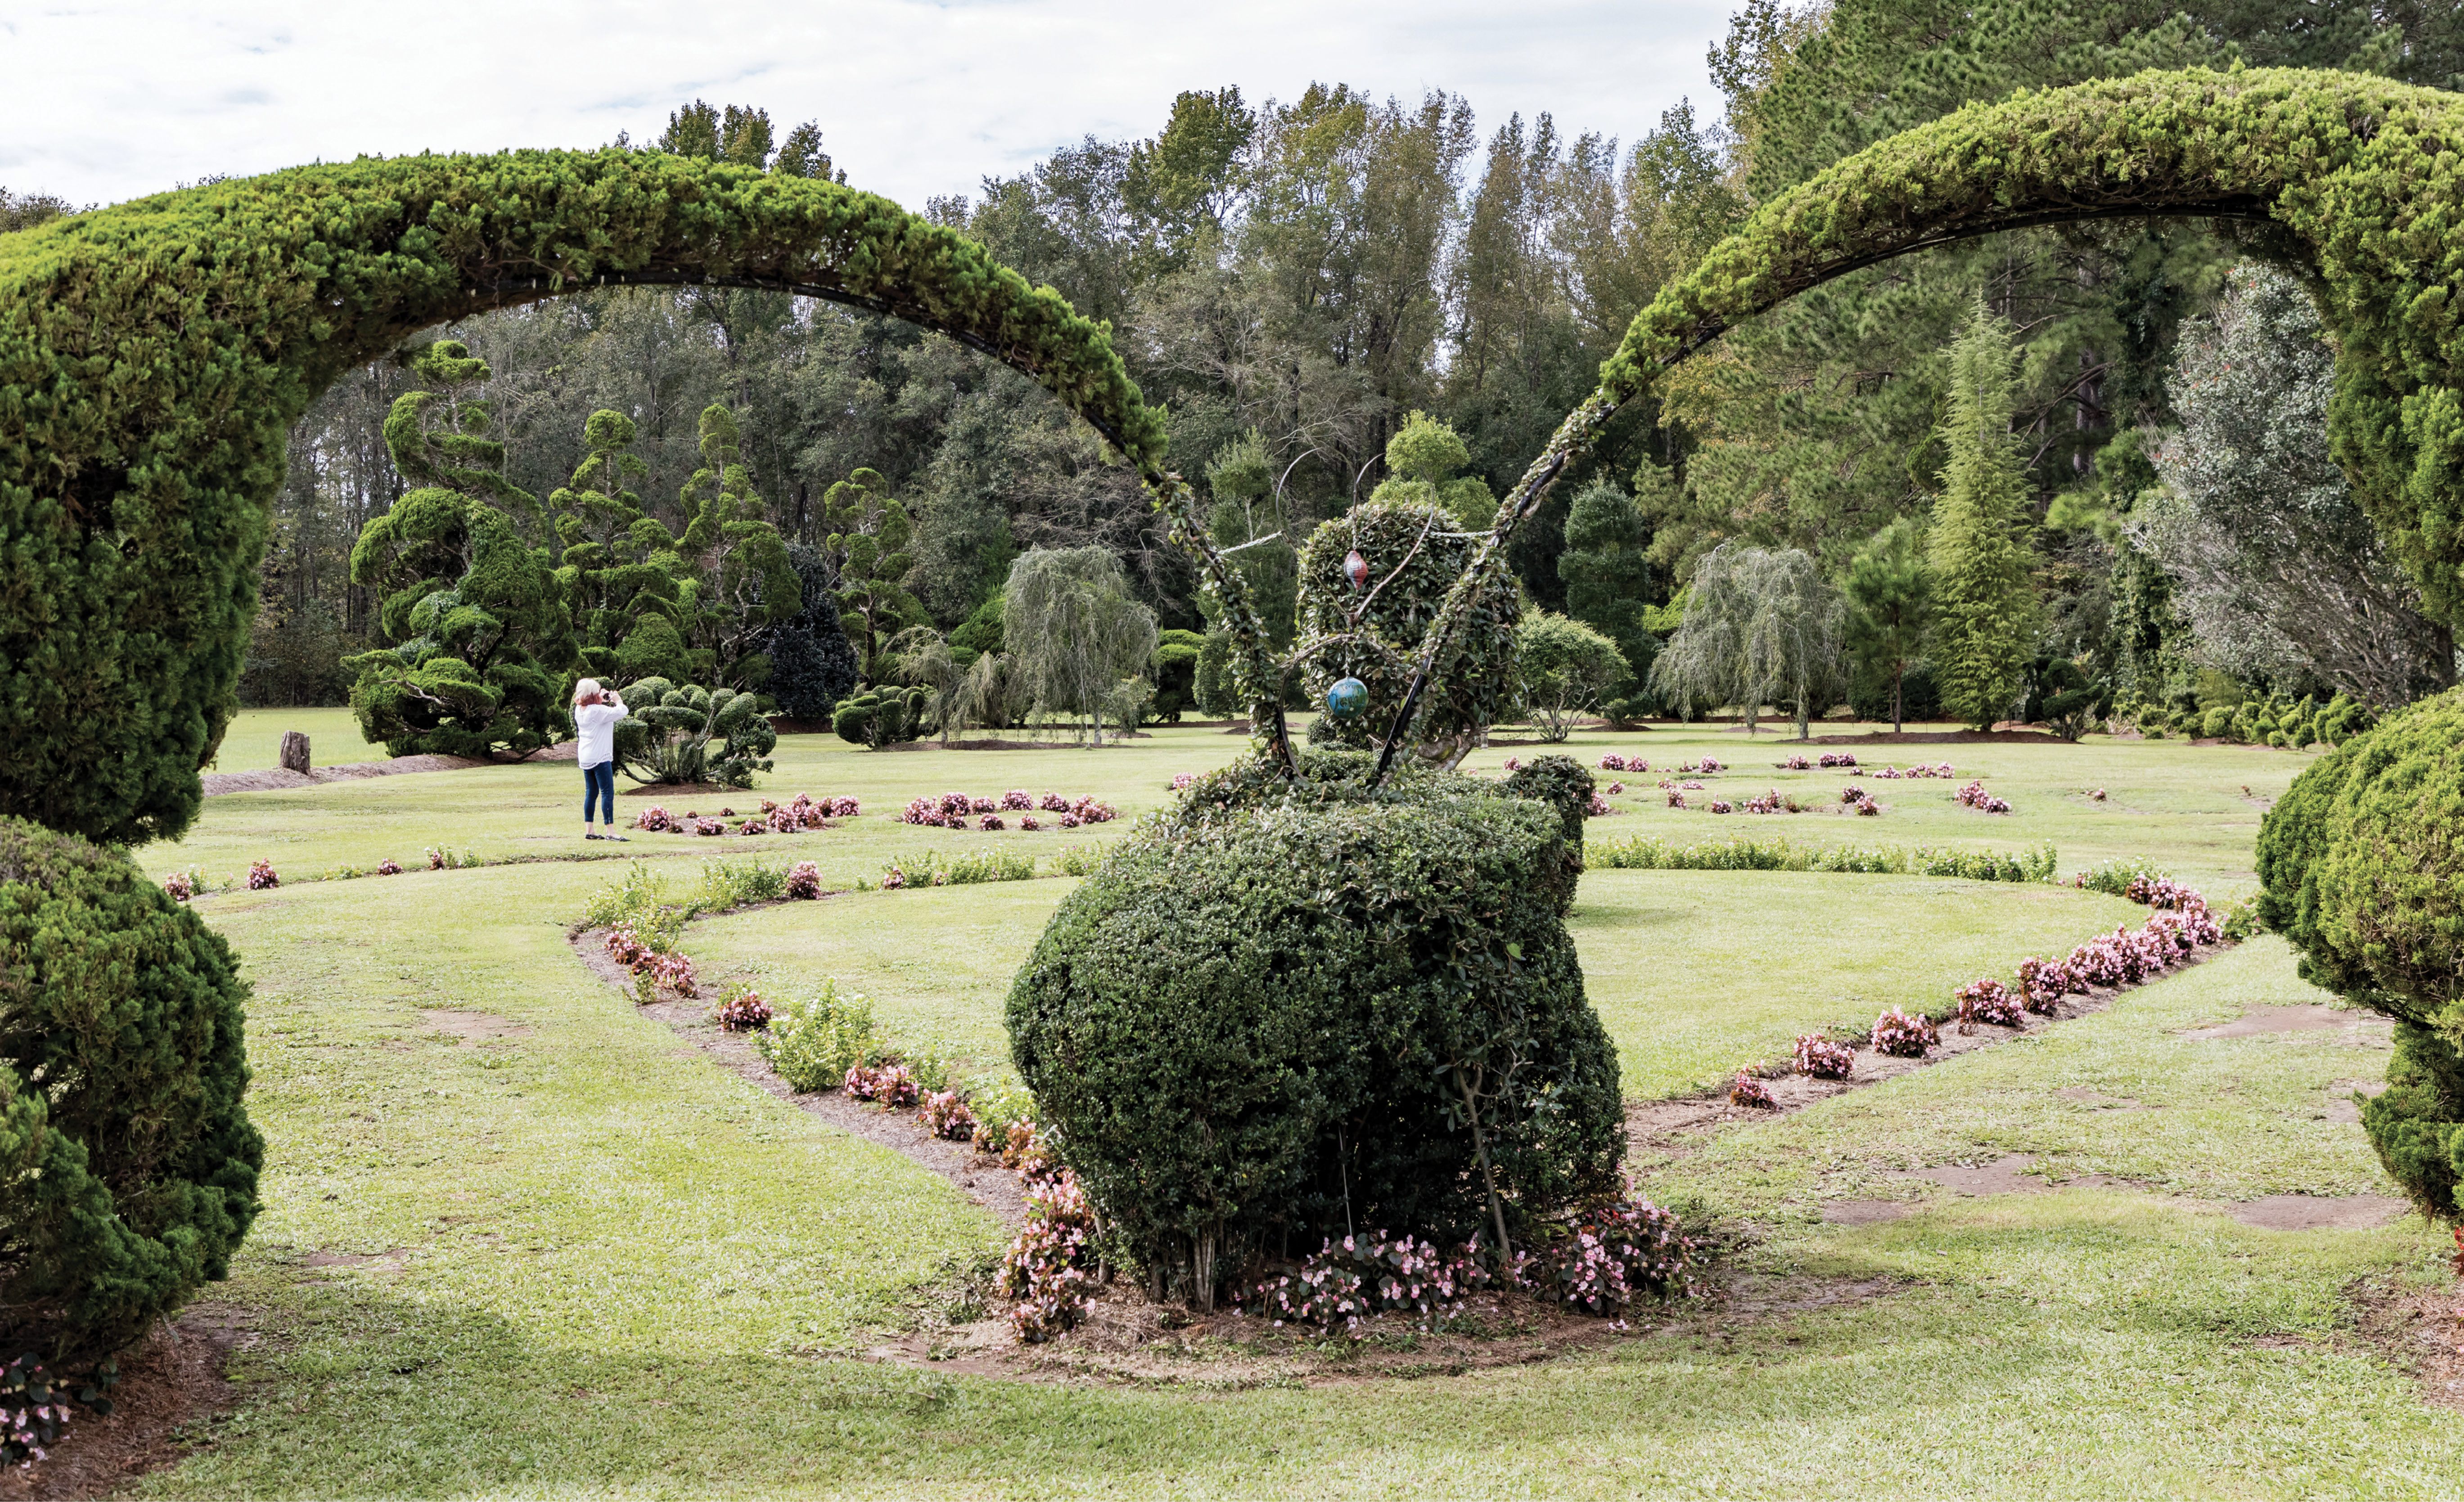 LOVE SPIRALS ON: Expressions of unity appear throughout the space. One planting spells out “LOVE, PEACE &amp; GOODWILL.” And by using PVC pipe and wire, Fryar encourages trees and shrubs to grow toward each other. “I like arches and fountains,” he says. The double arcs, shown here, help to create a heart shape.